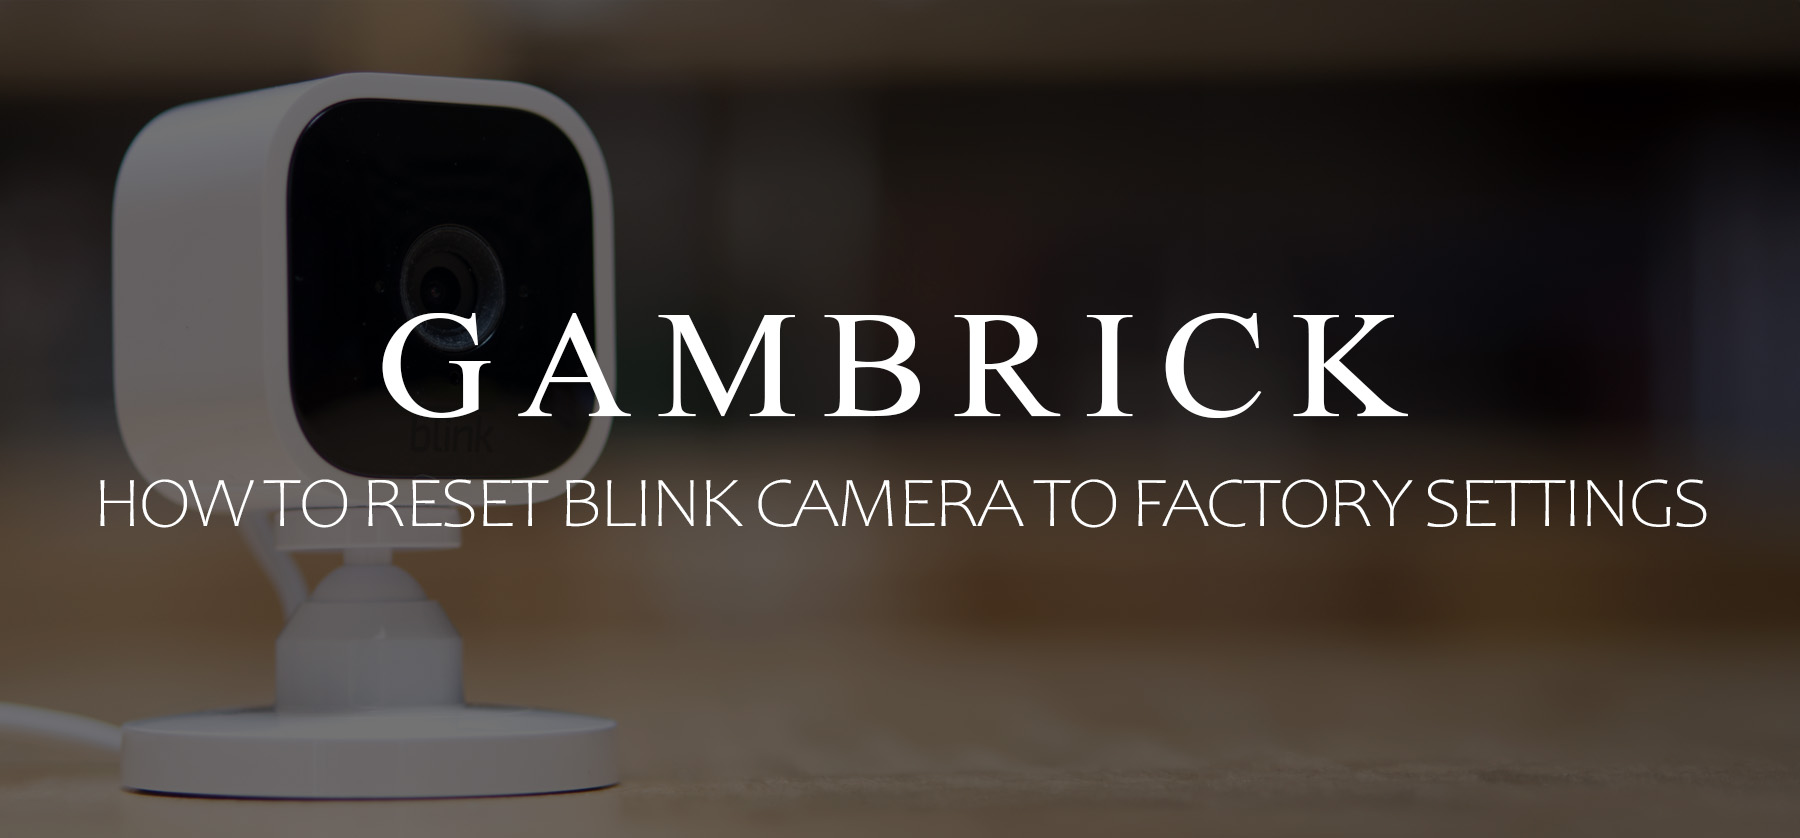 How To Reset Blink Camera To Factory Settings banner 1.0